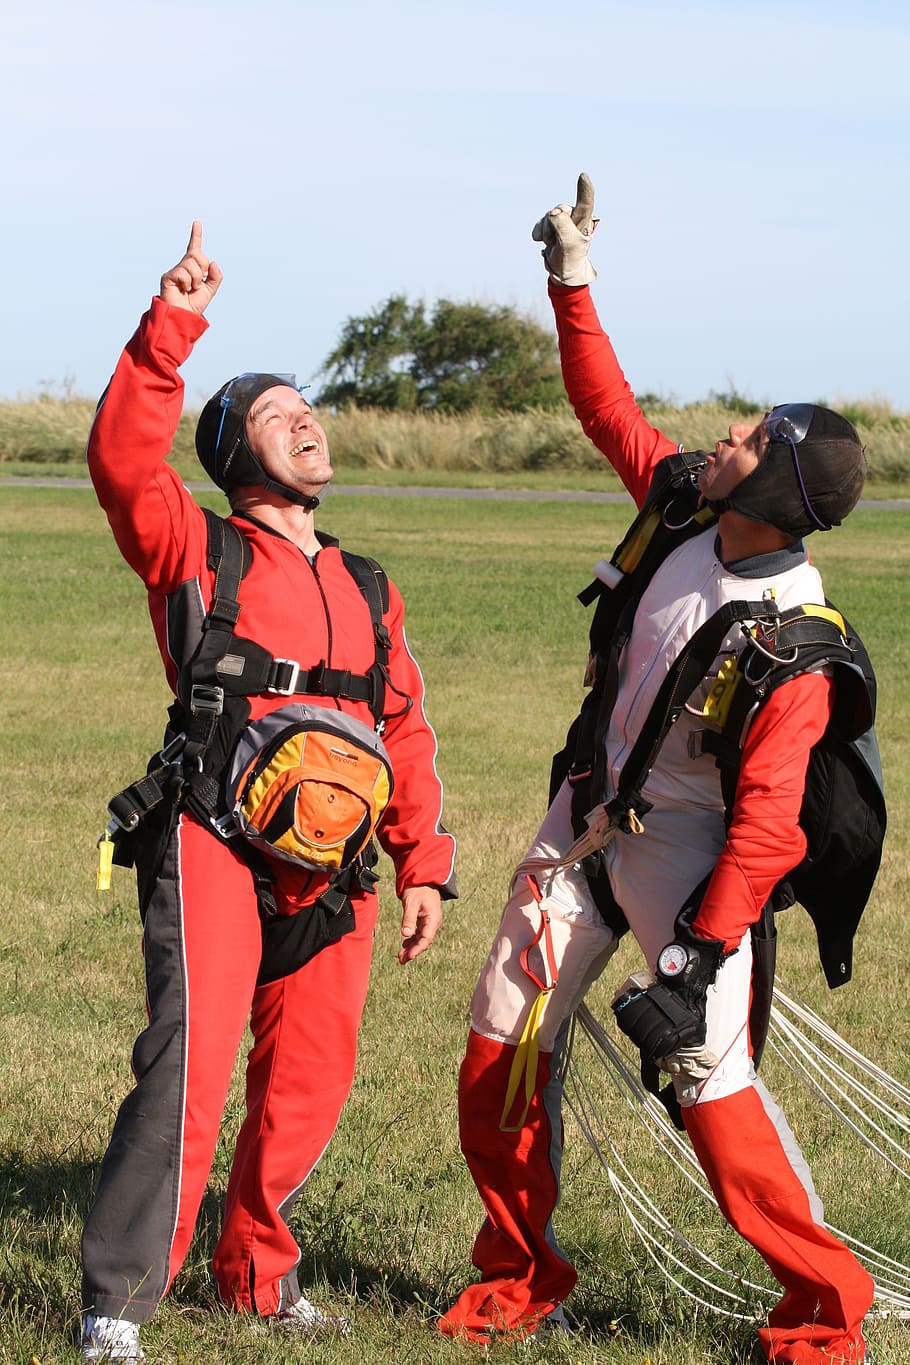 parachutists, skydivers, skydive, success, parachuting, thrilling, parachute, skydiving, real people, two people